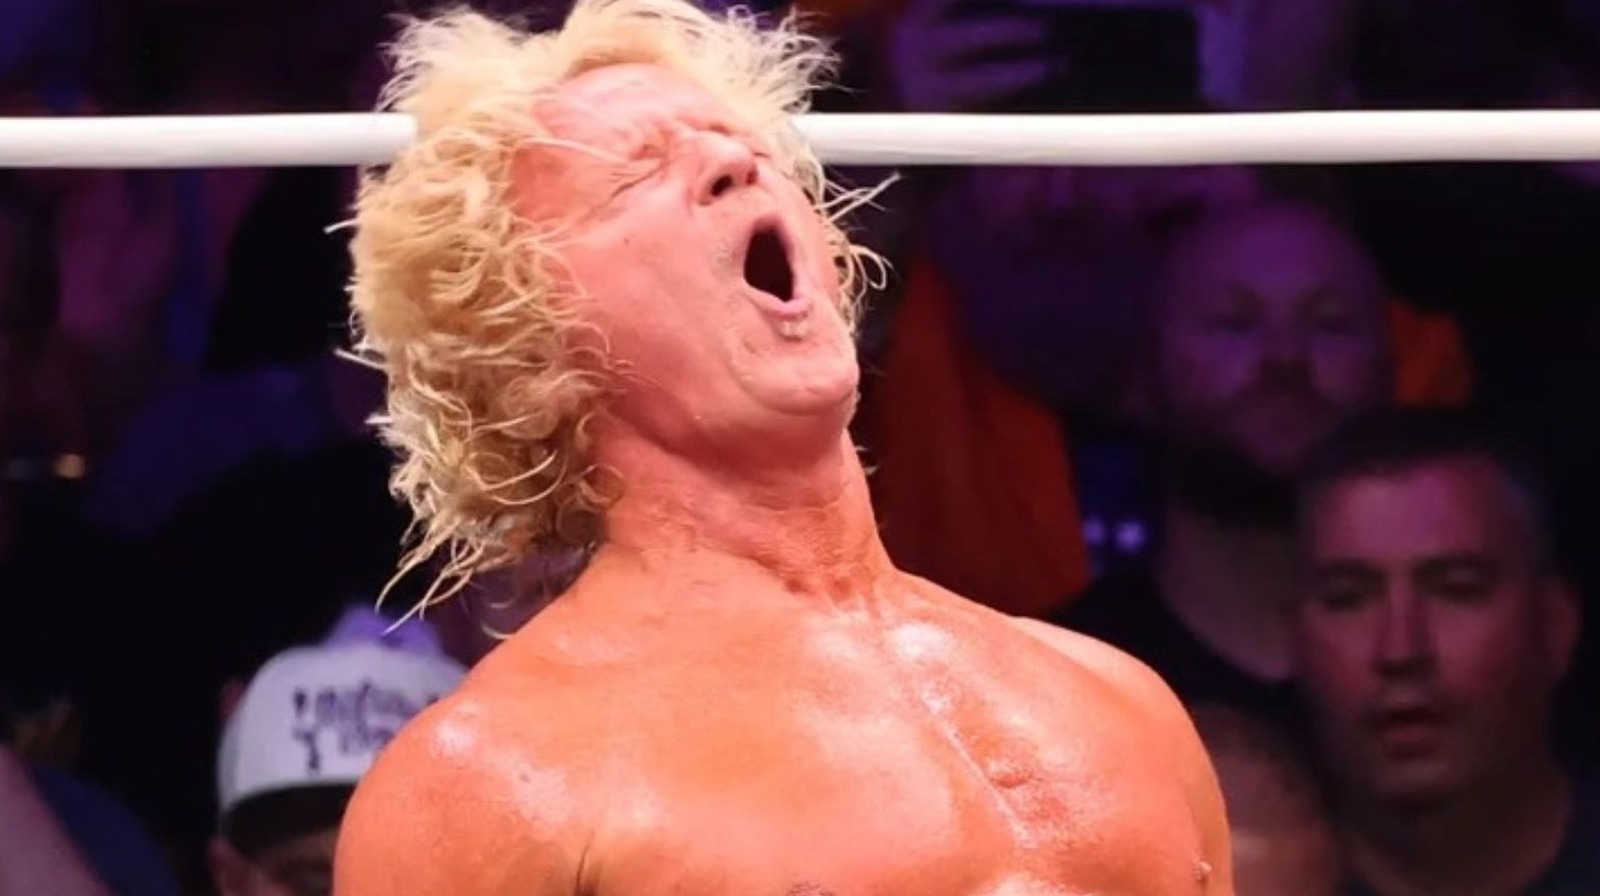 AEW's Jeff Jarrett Says Wrestlers 'Have To Have' This Skill Set